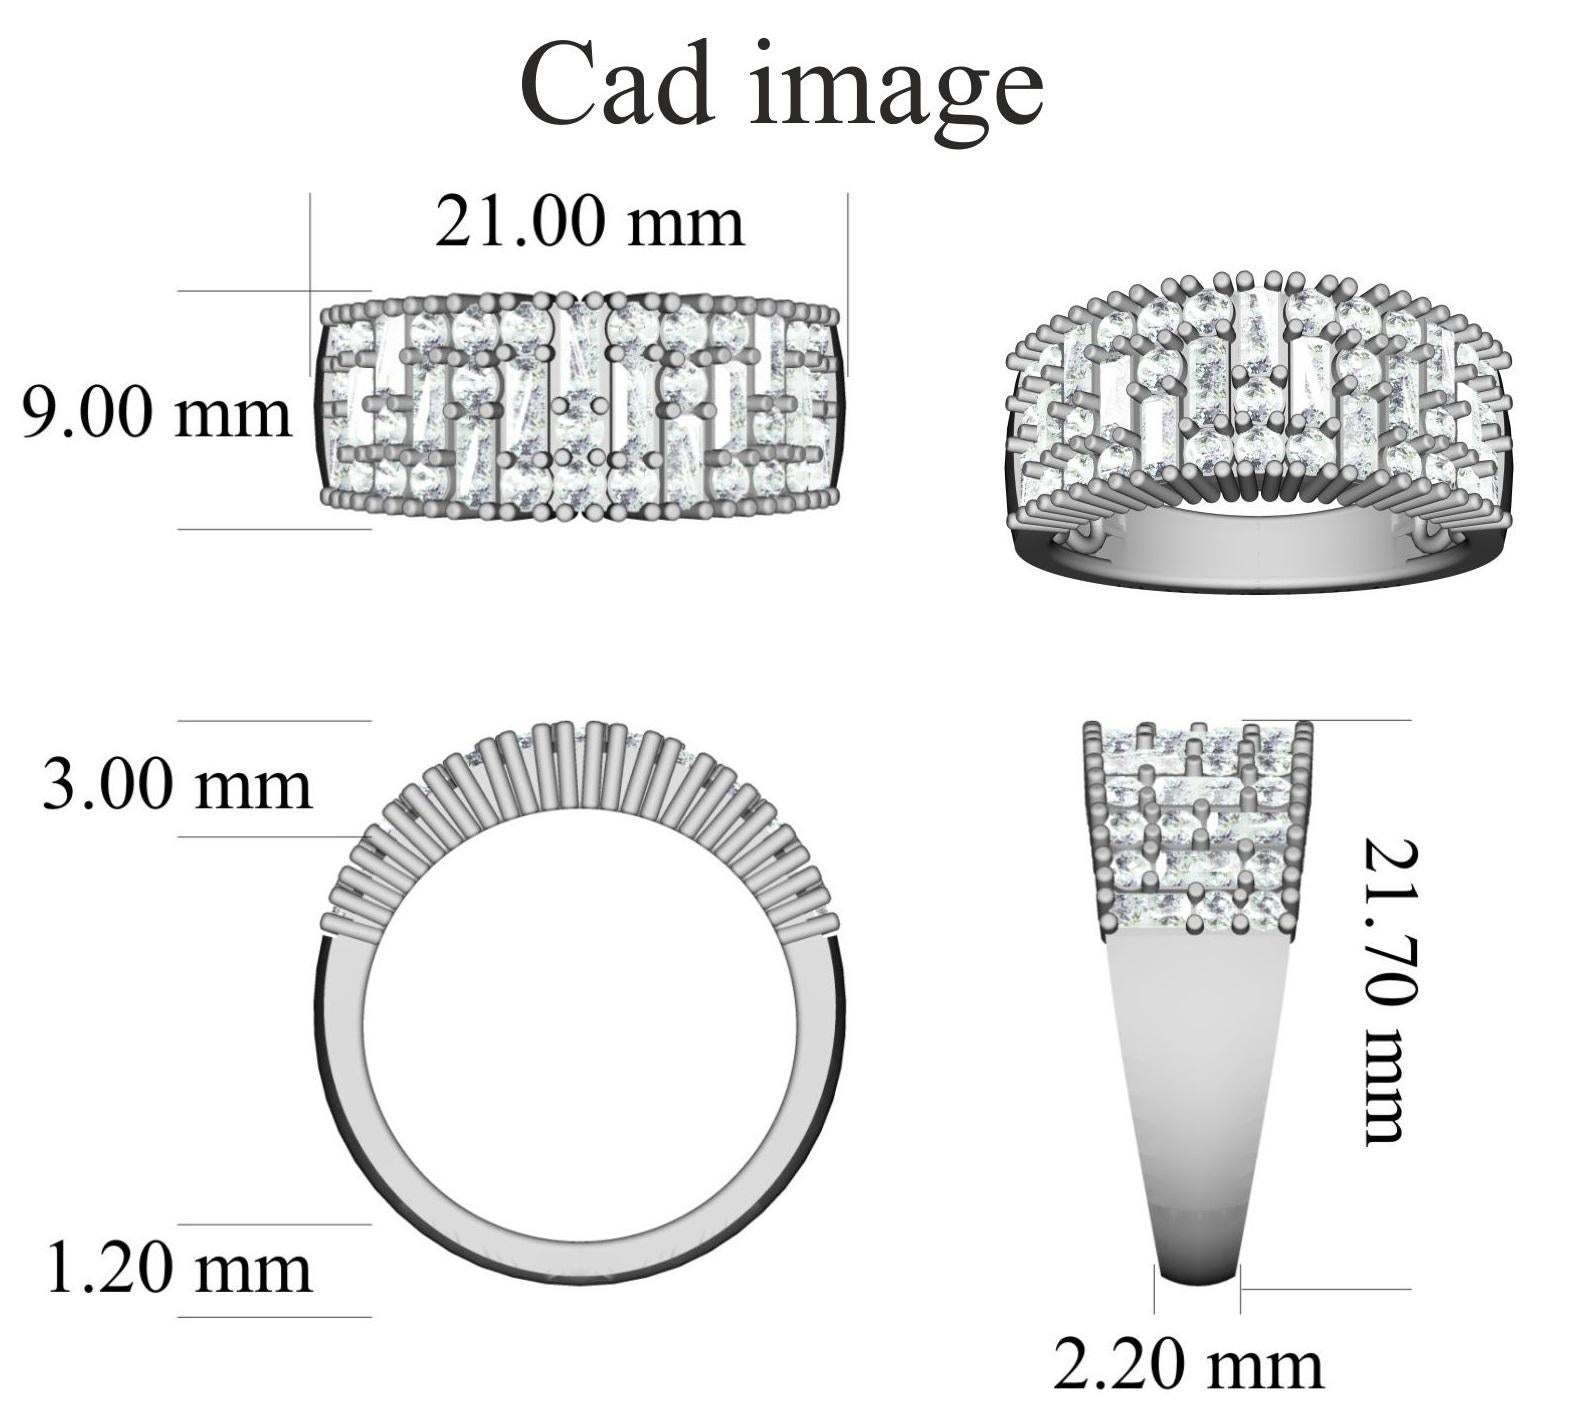 Bring charm to your look with this diamond ring. The ring is crafted from 14-karat white gold and features 26 Round and 13 Baguette cut white diamonds sets in Prong setting, shines in H-I color I2 clarity and a high polish finish complete the